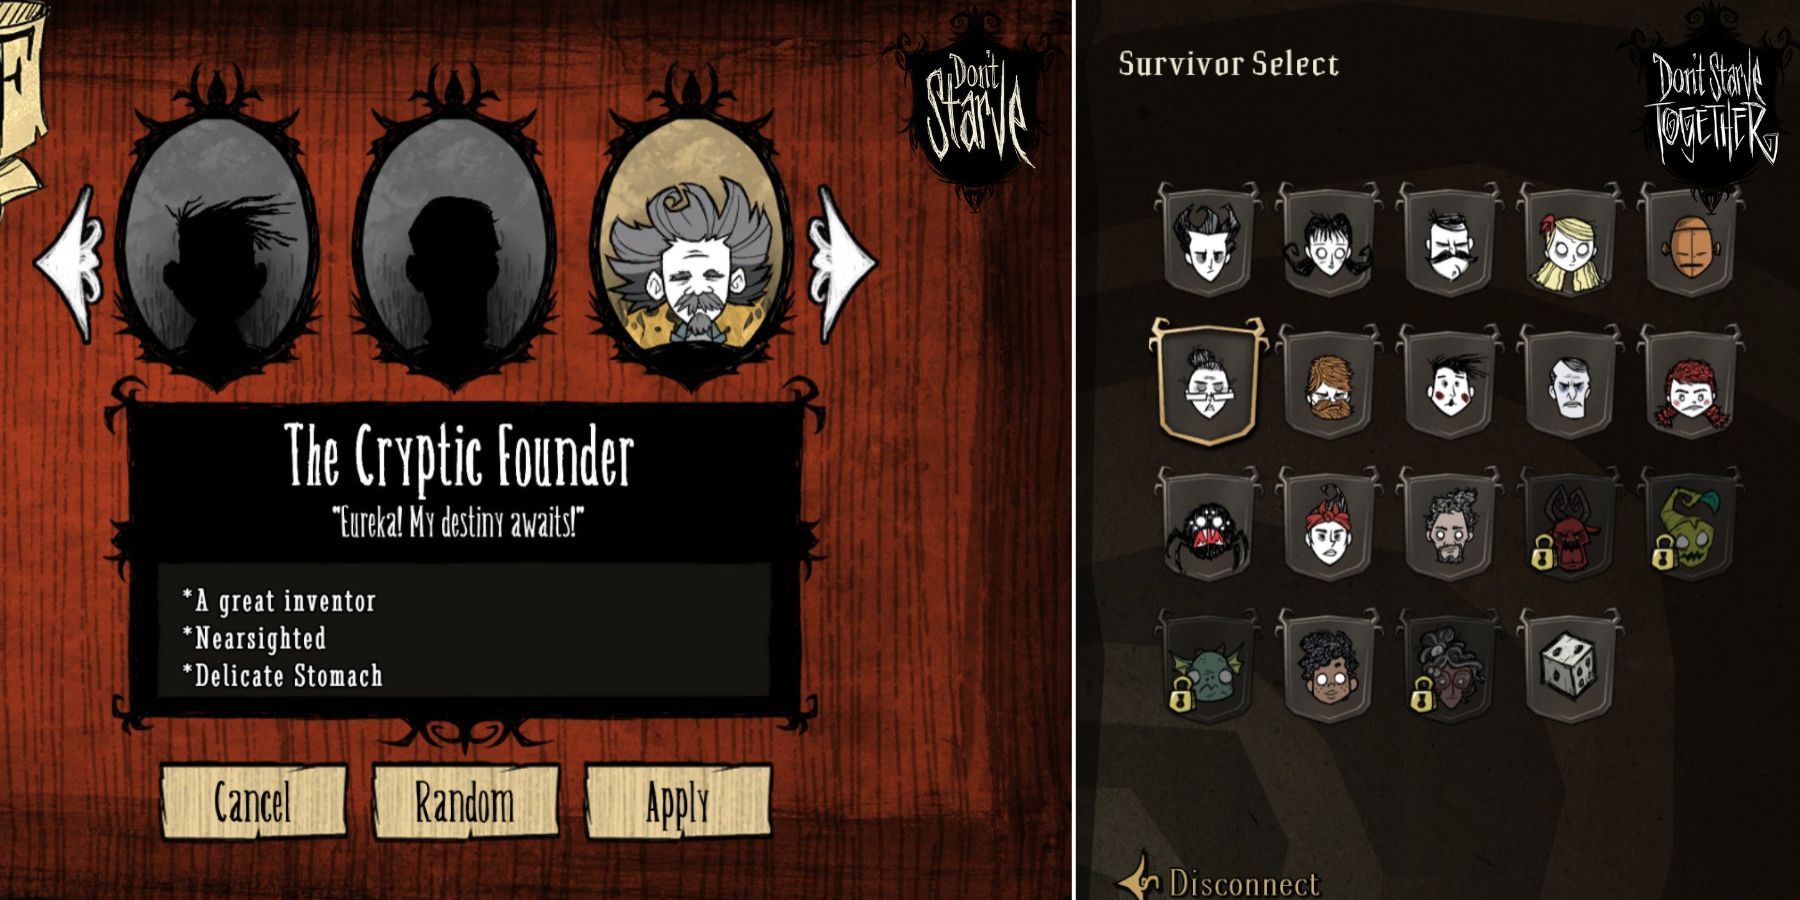 don't starve vs dont starve together character selection